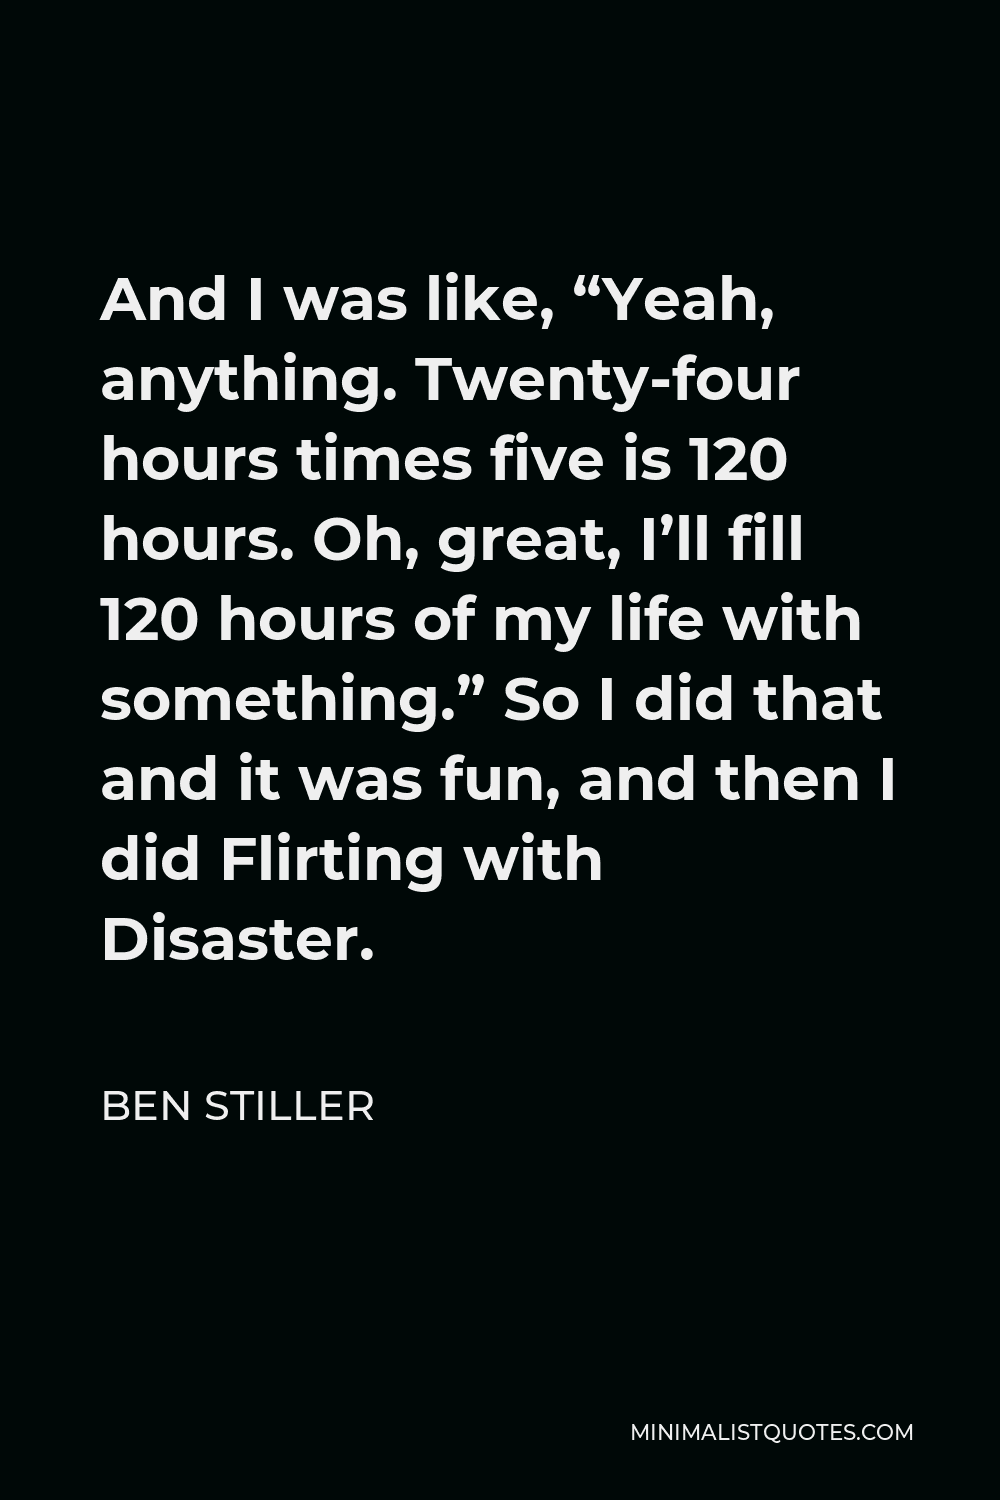 Ben Stiller Quote - And I was like, “Yeah, anything. Twenty-four hours times five is 120 hours. Oh, great, I’ll fill 120 hours of my life with something.” So I did that and it was fun, and then I did Flirting with Disaster.